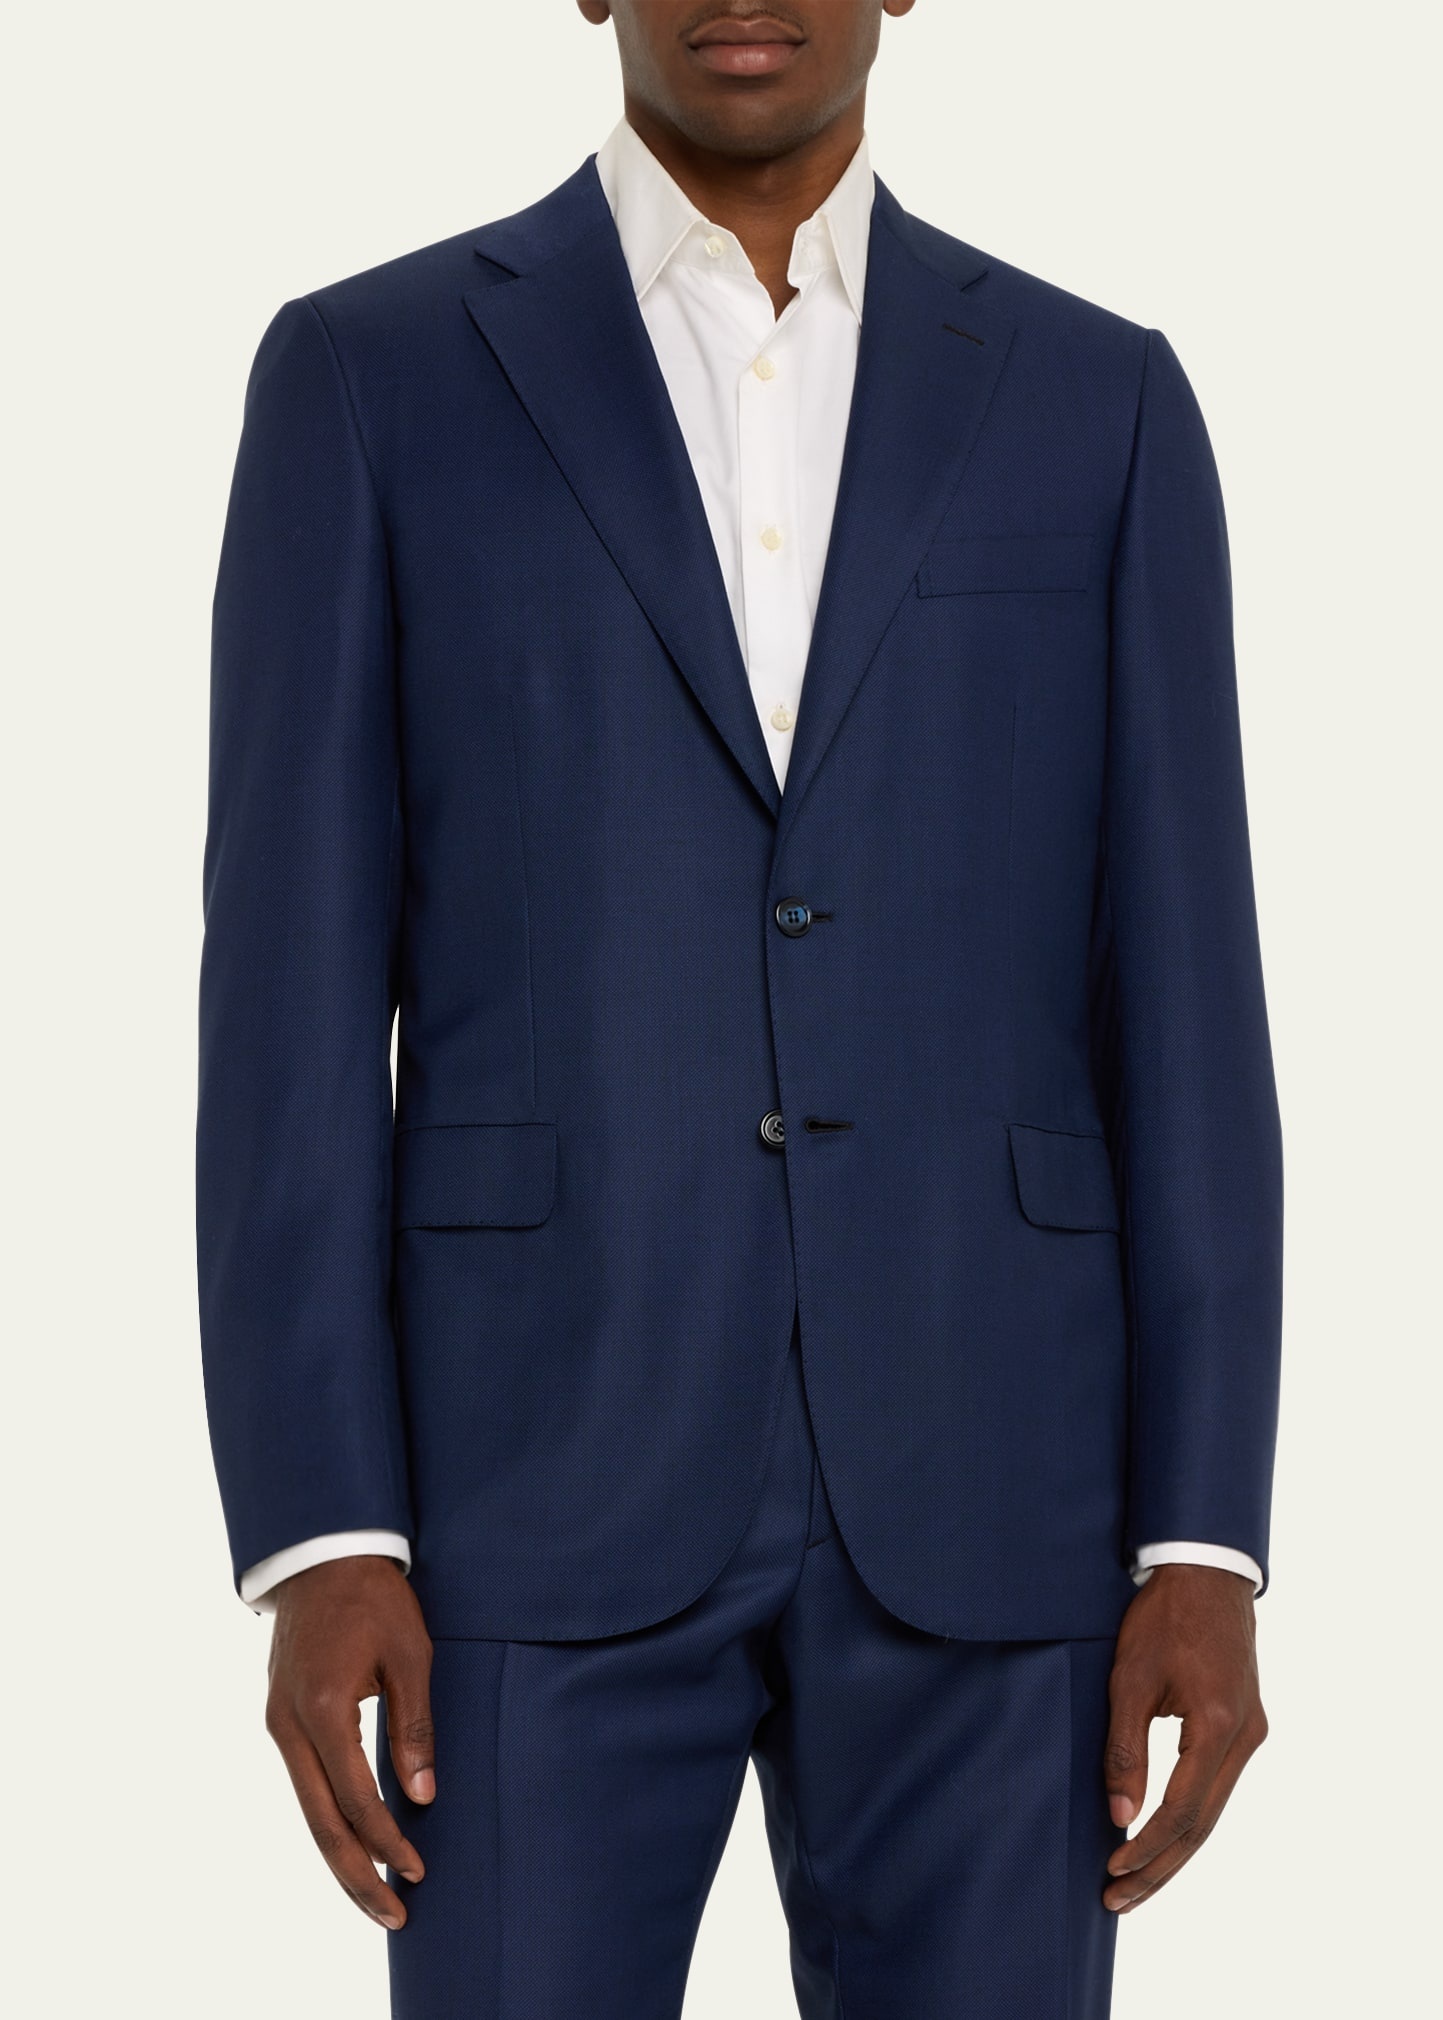 Men's Textured Solid Two-Piece Suit, Bright Navy - 4